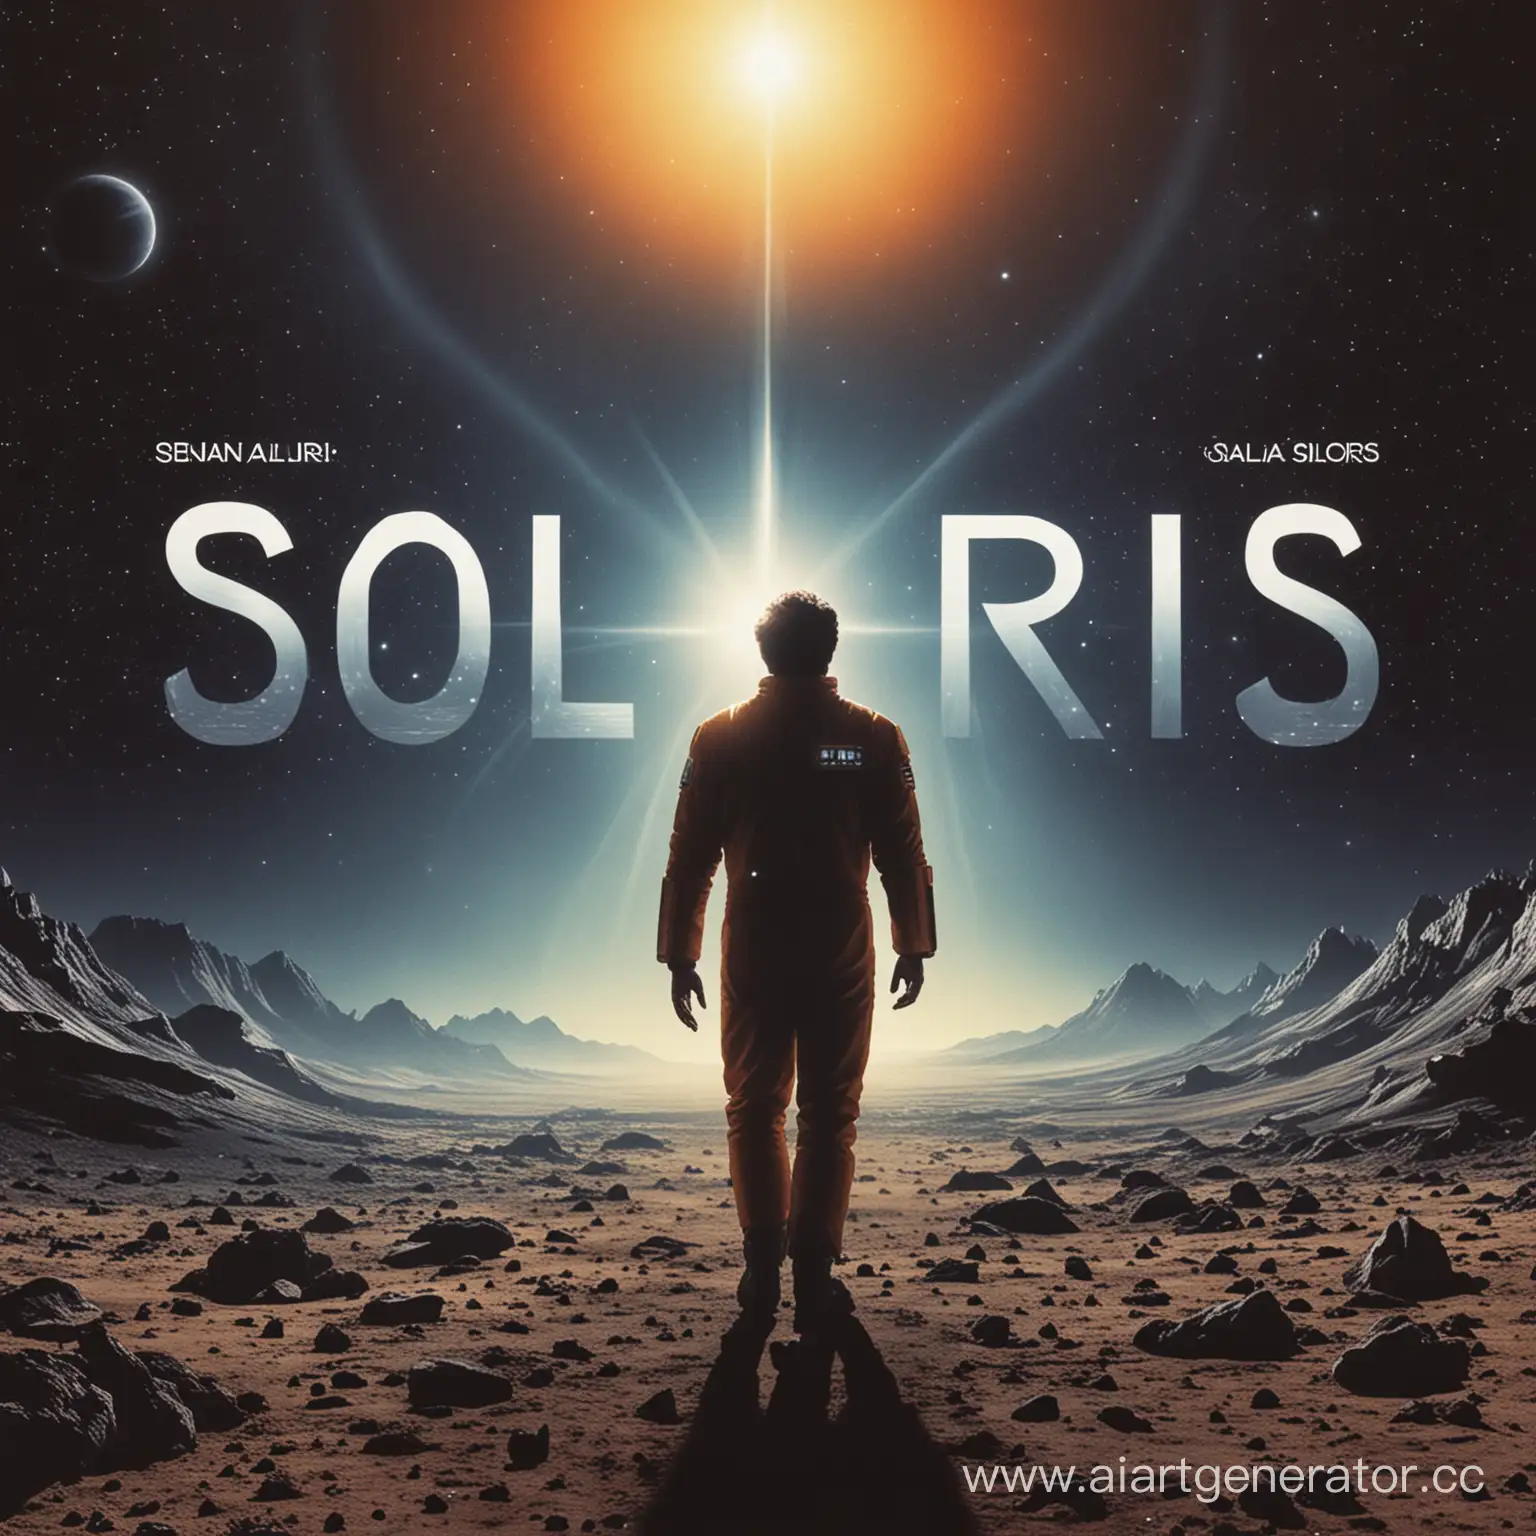 Mysterious-Solaris-Film-Cover-Art-Revealed-Enigmatic-Space-Odyssey